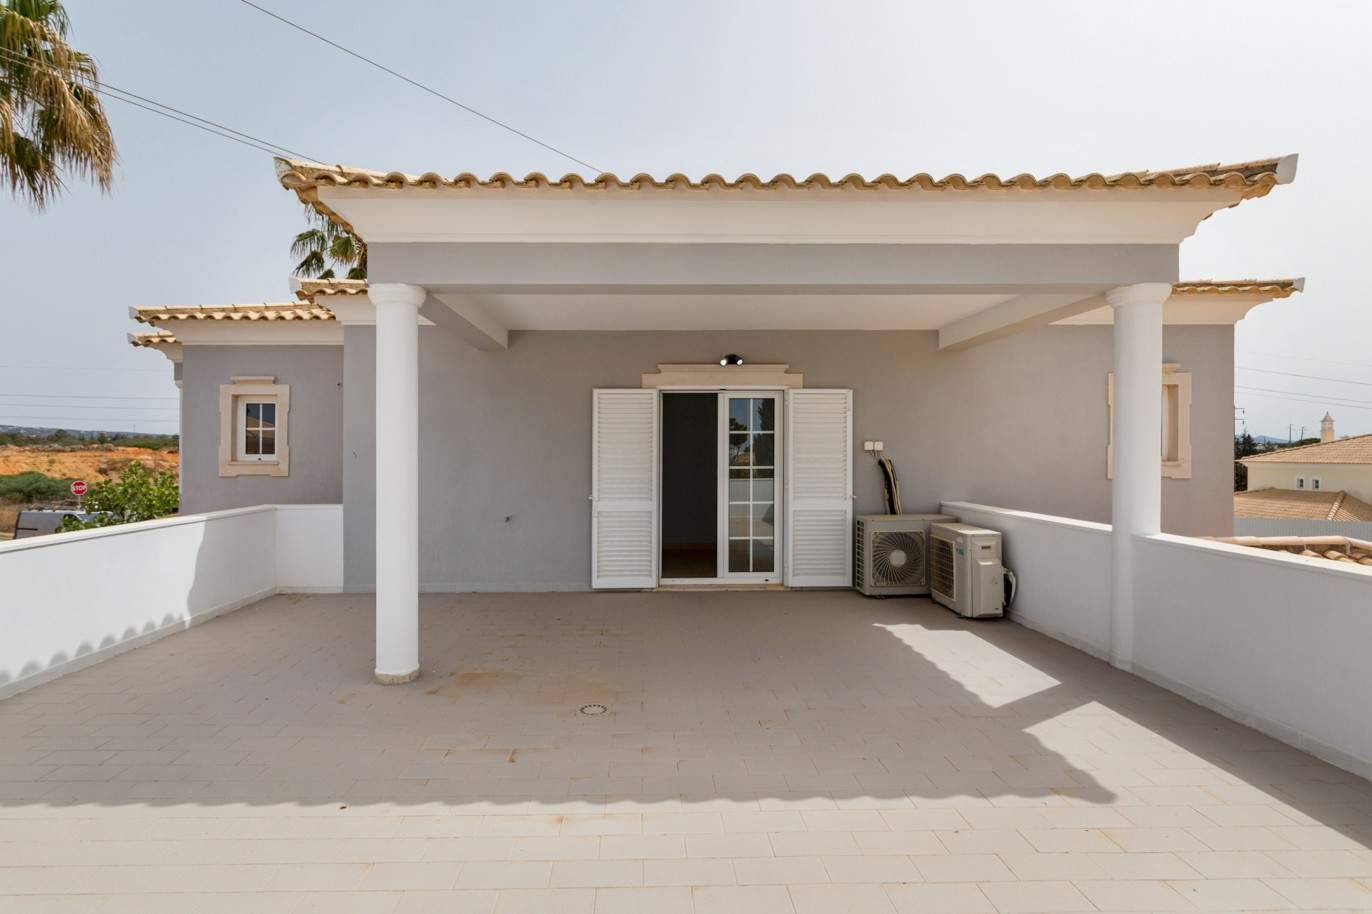 4 Bedroom Villa with swimming pool, for sale in Quarteira, Algarve_201728